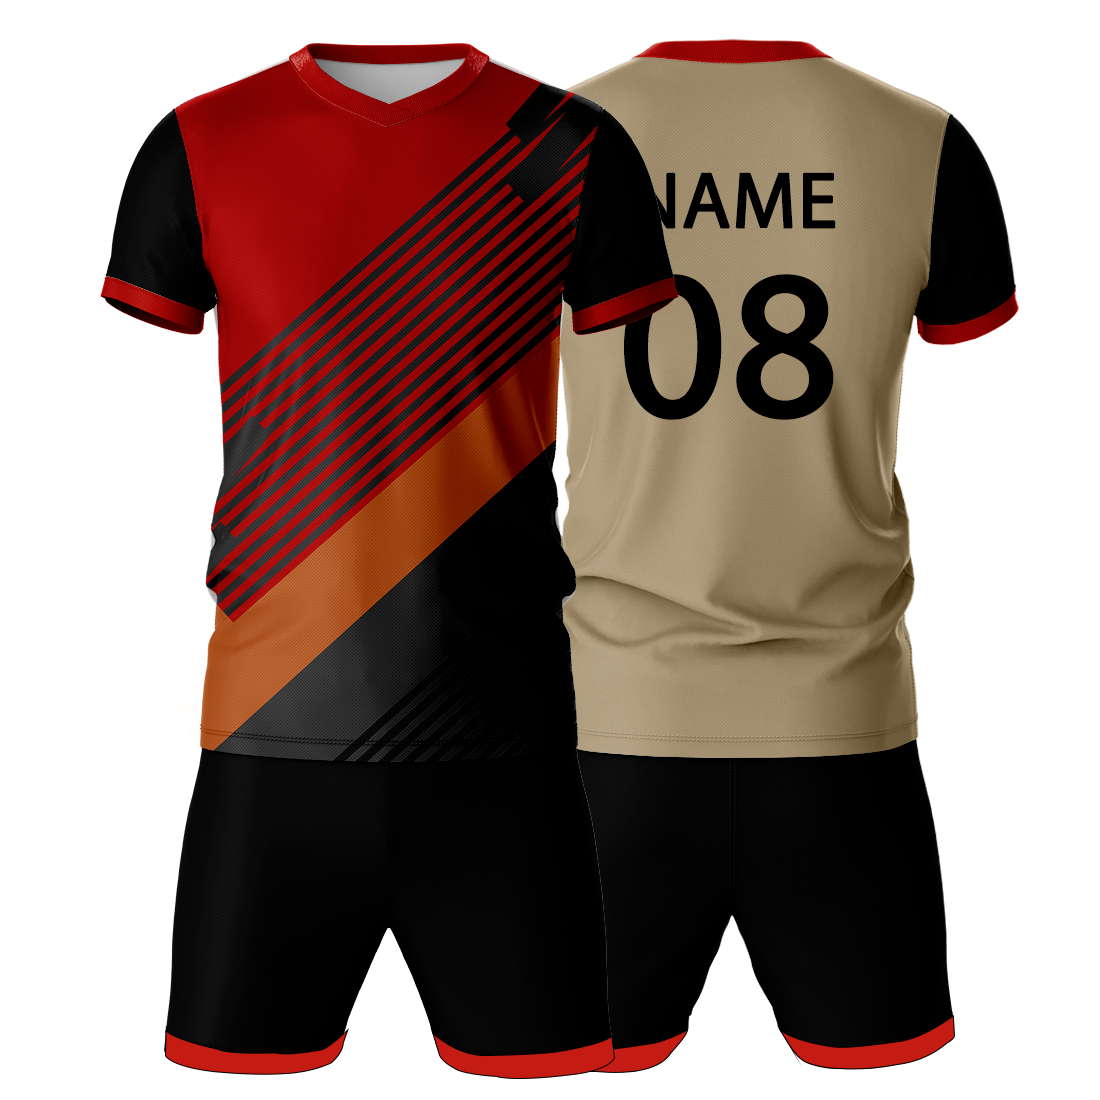 All Over Printed Jersey With Shorts Name & Number Printed.NP50000684